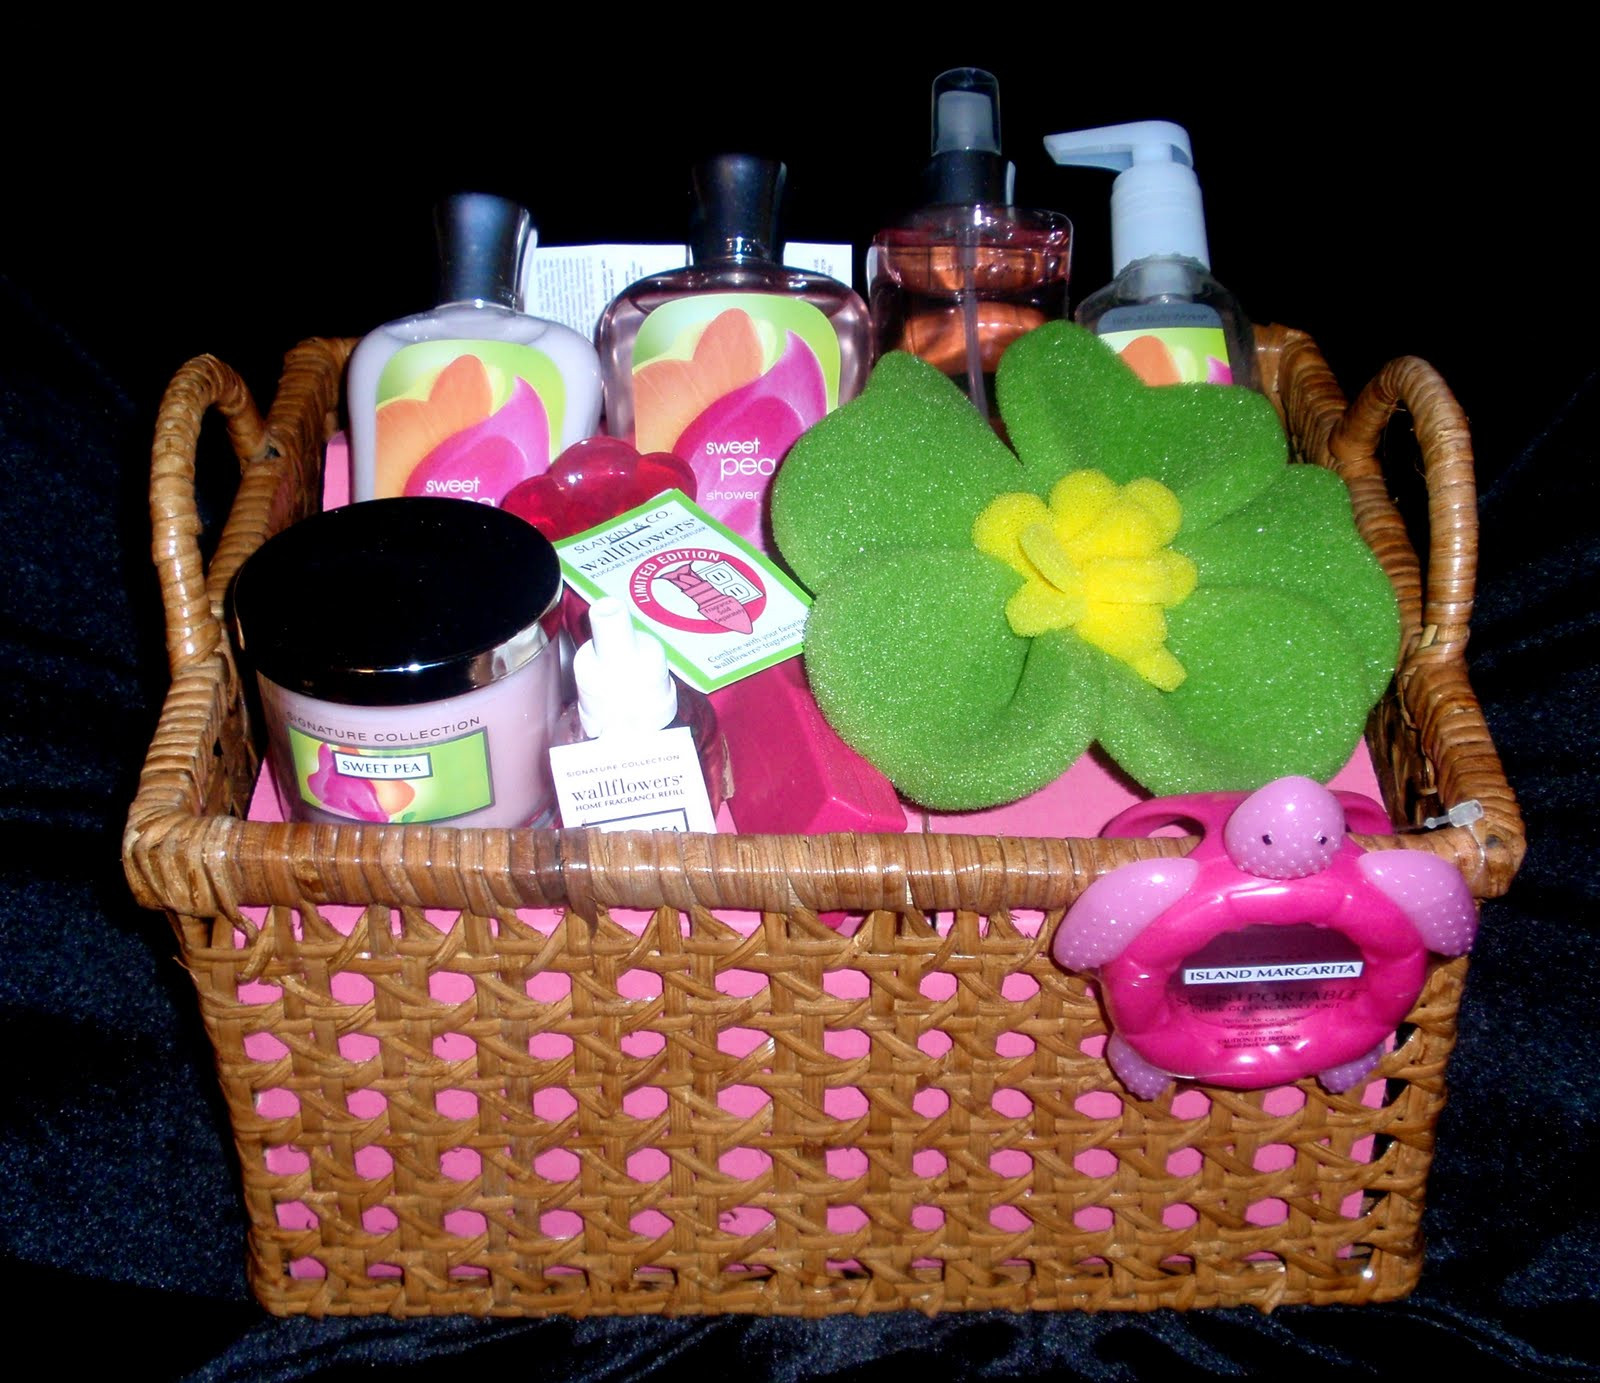 Bath And Body Works Gift Basket Ideas
 Alexander s Auction Sweet Pea Gift Basket from Bath and